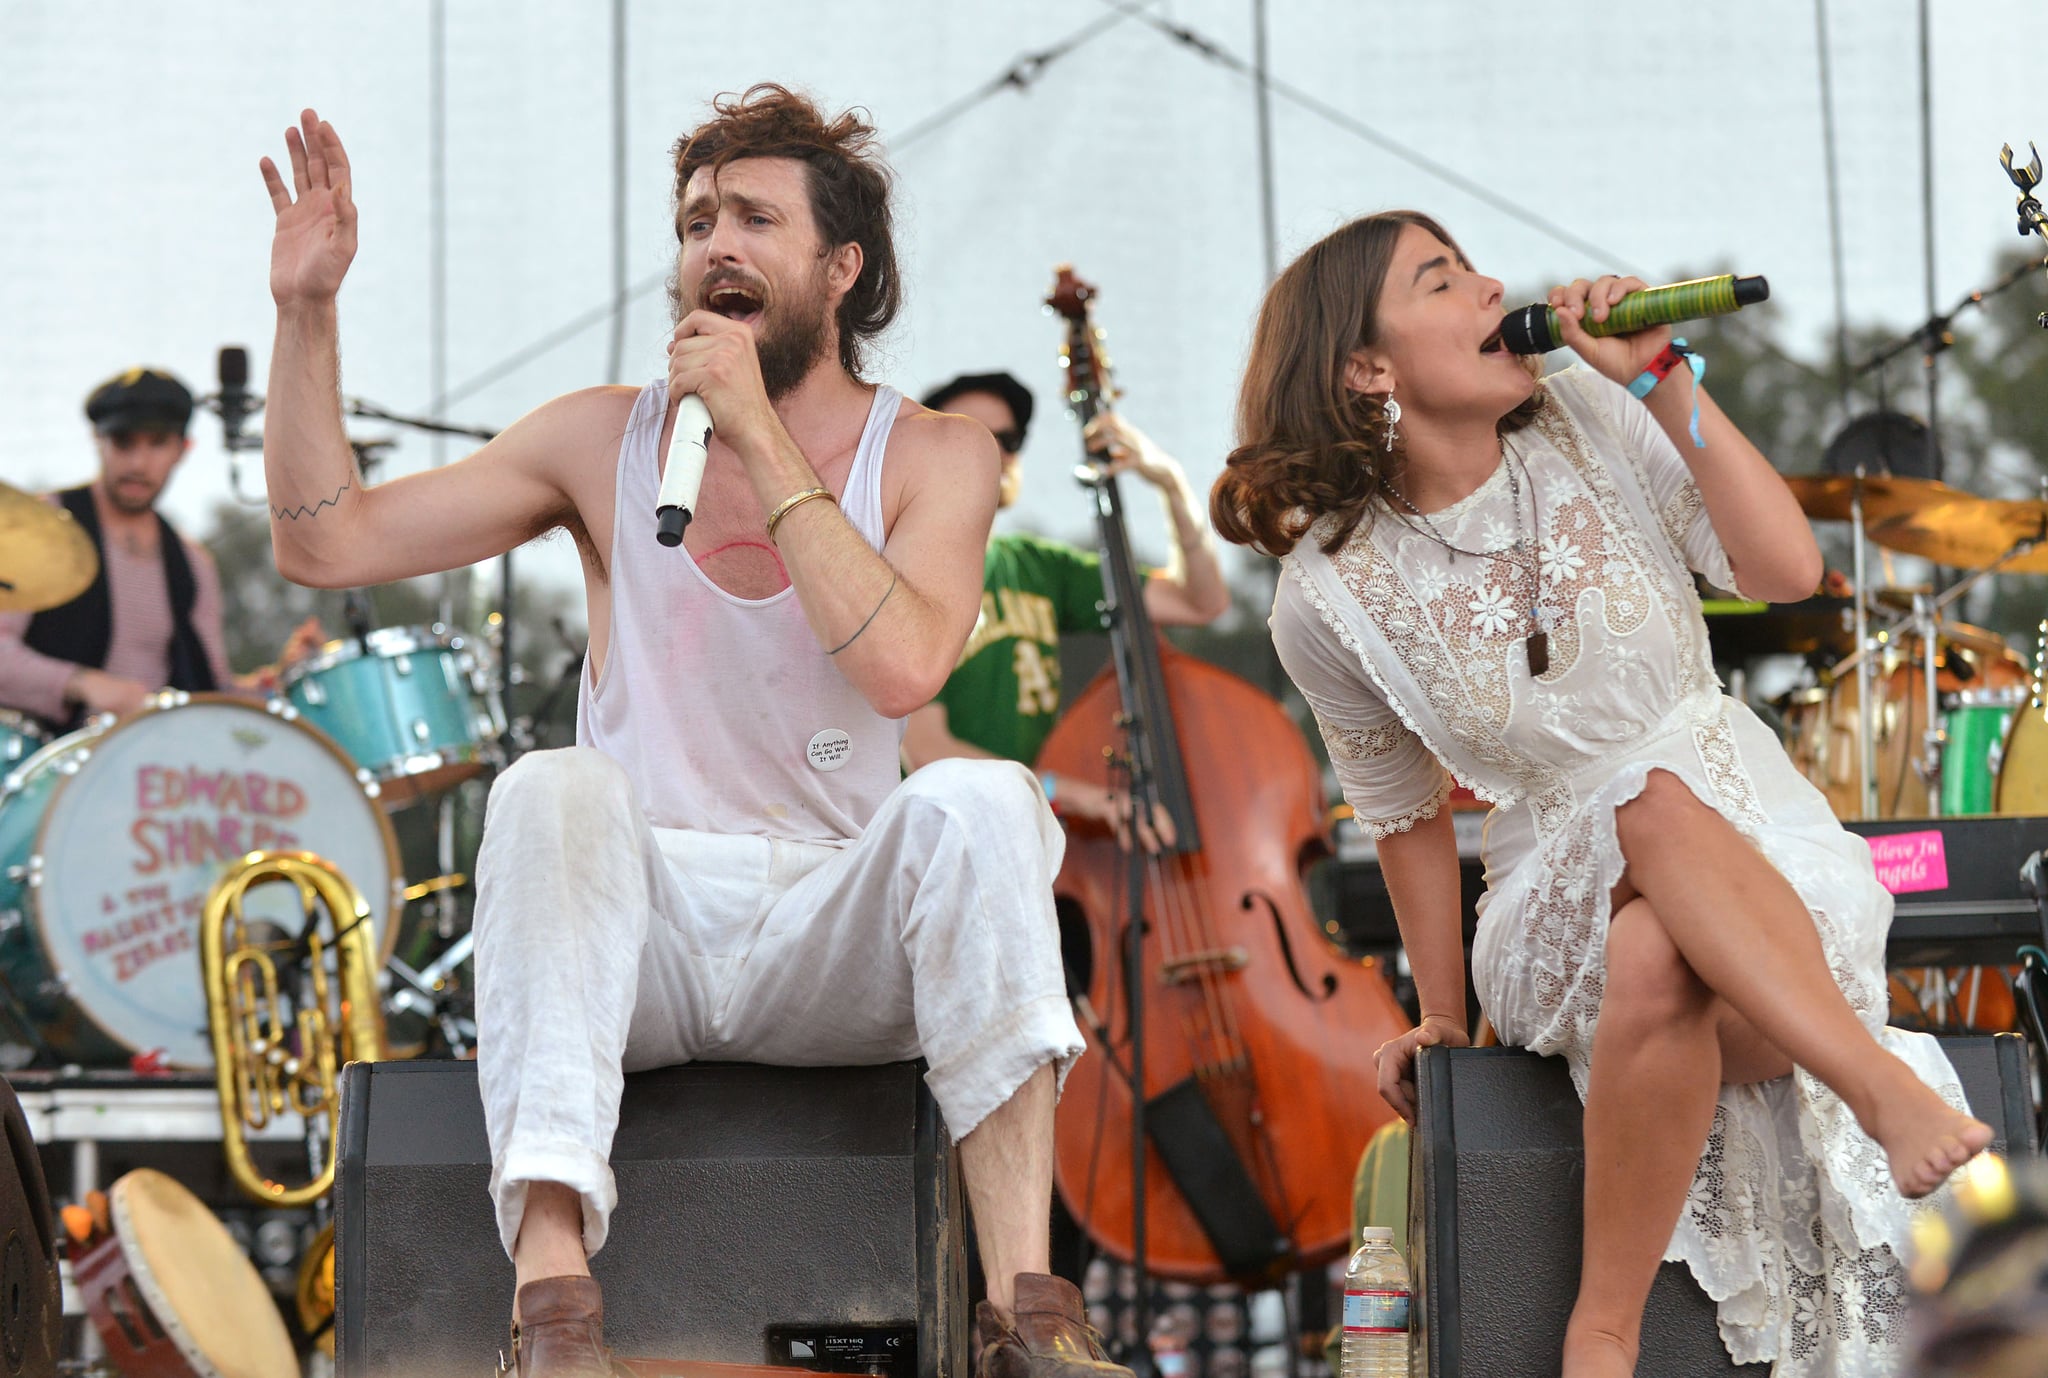 Edward Sharpe and the Magnetic Zeros akkorde